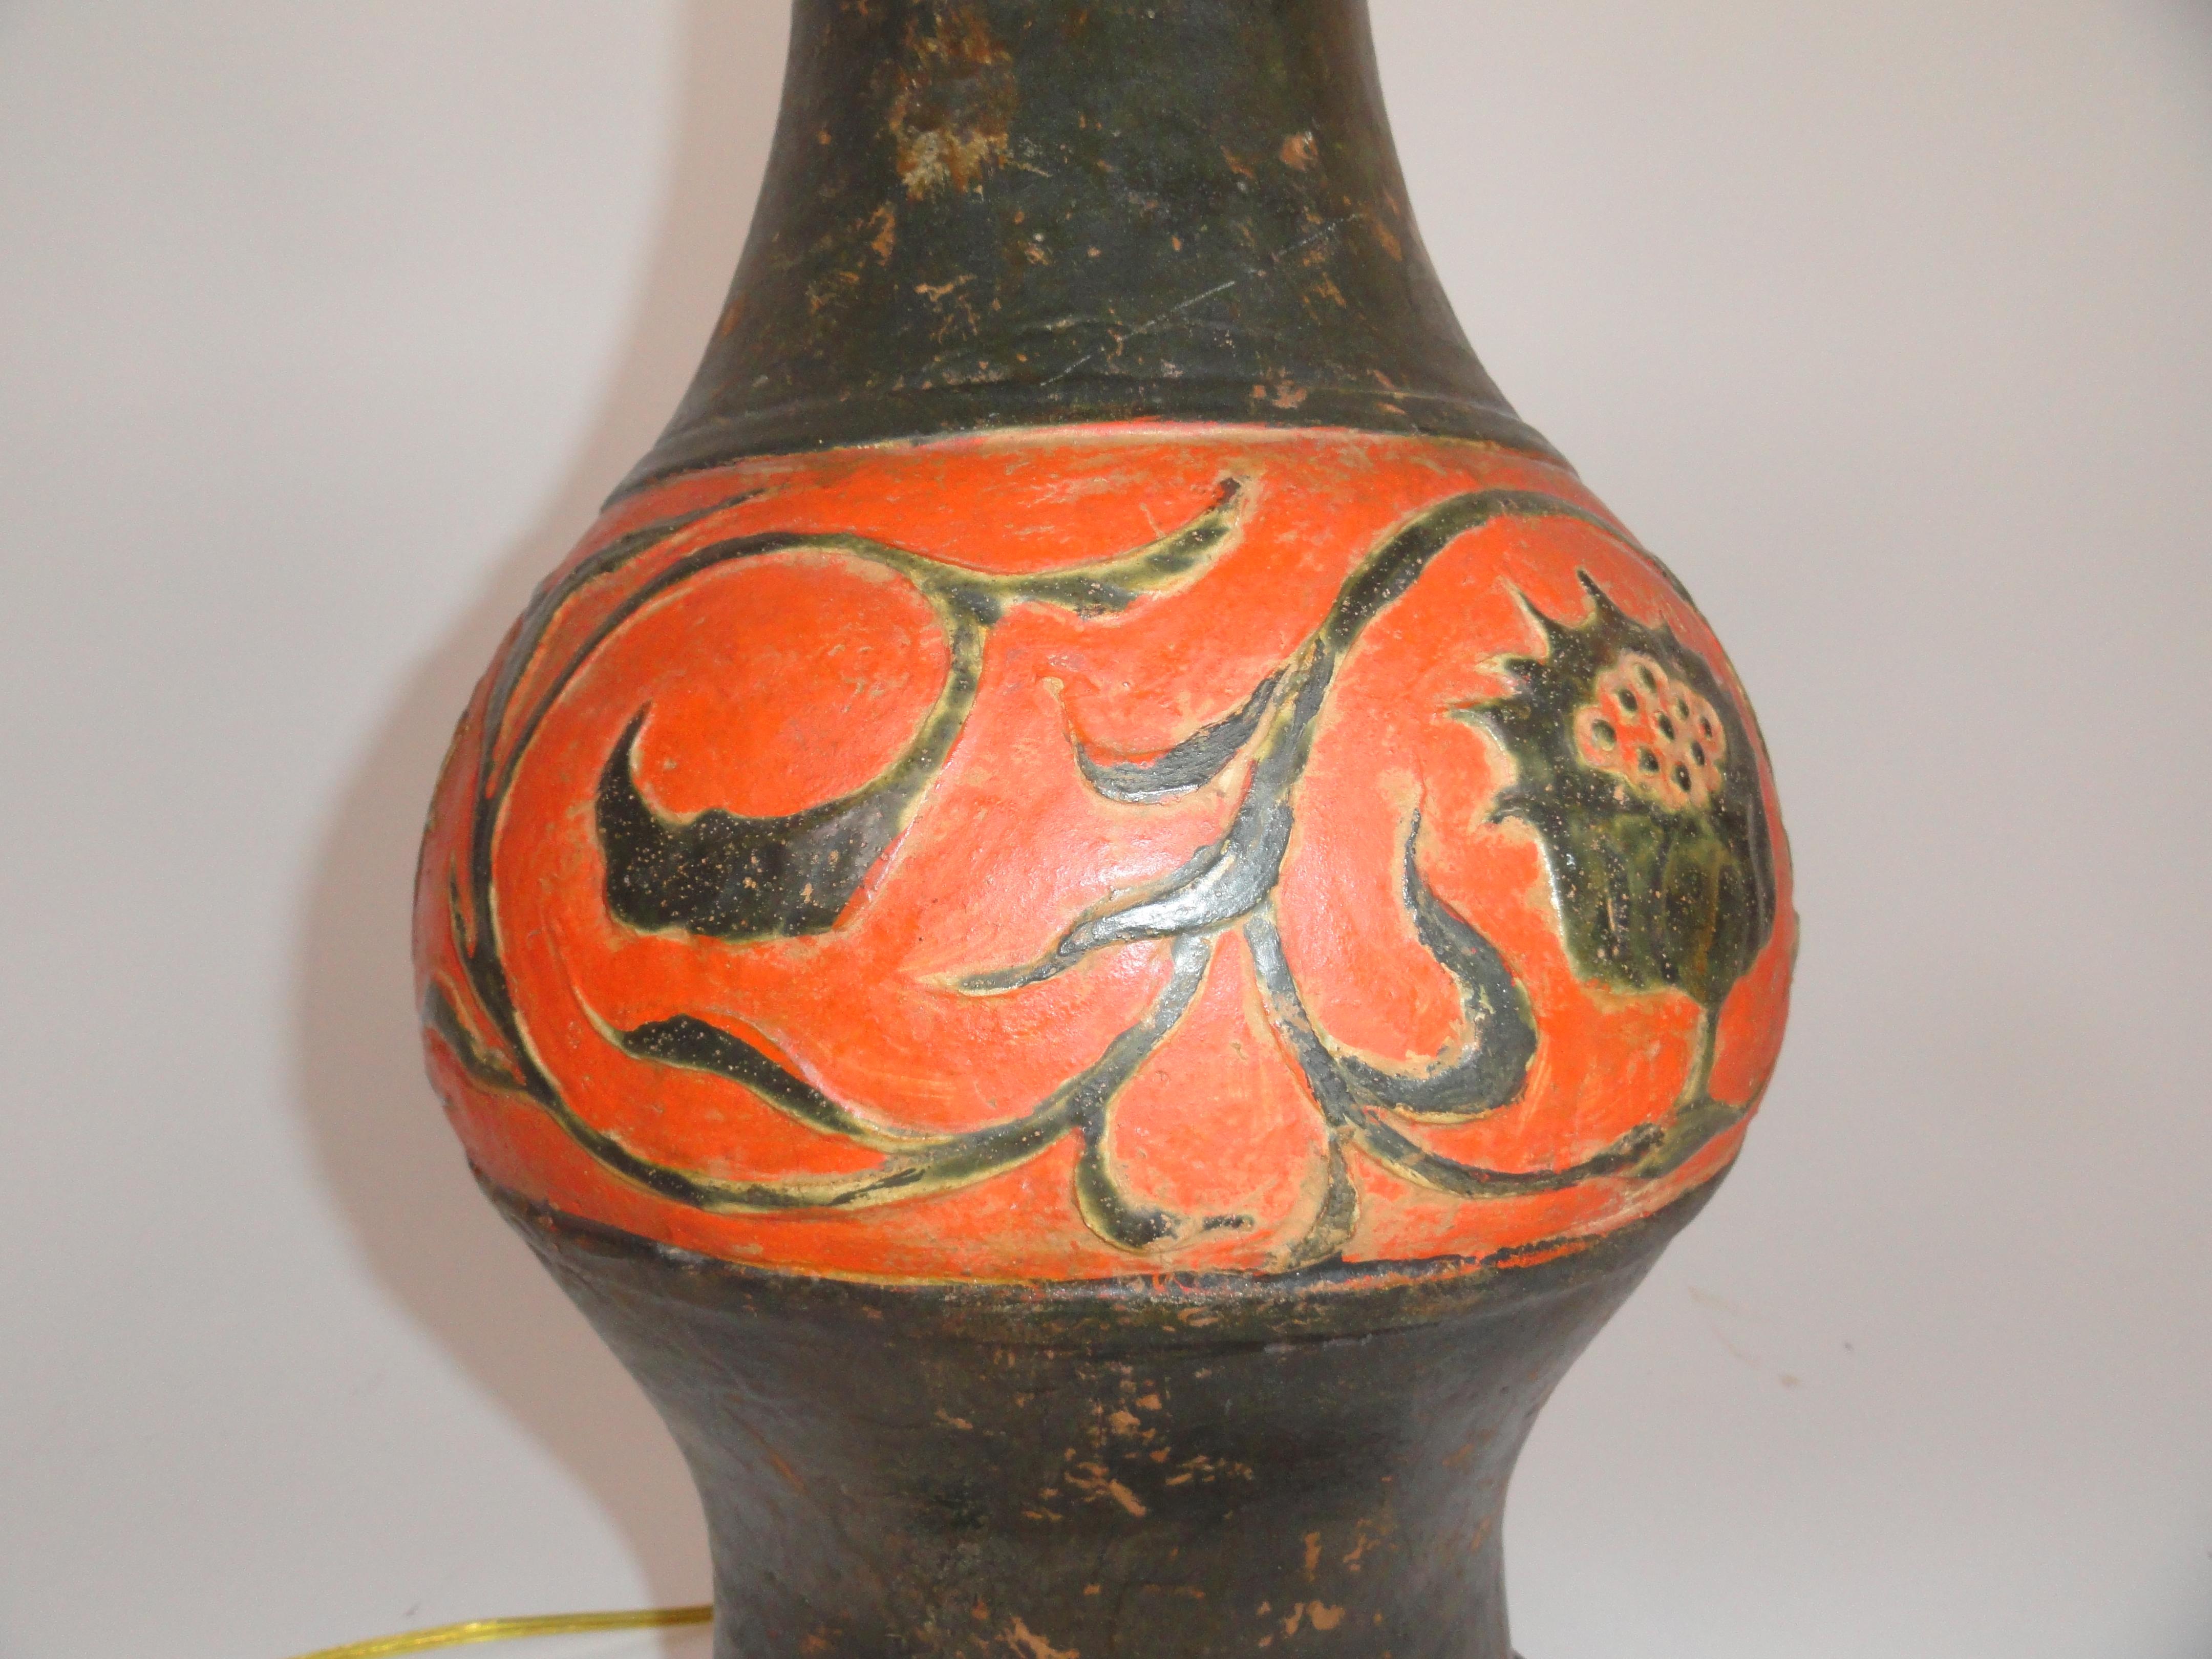 Etruscan style lamp. Ceramic vase lamp in the Estruscan taste with a naturally worn finish.
Measures 20.5